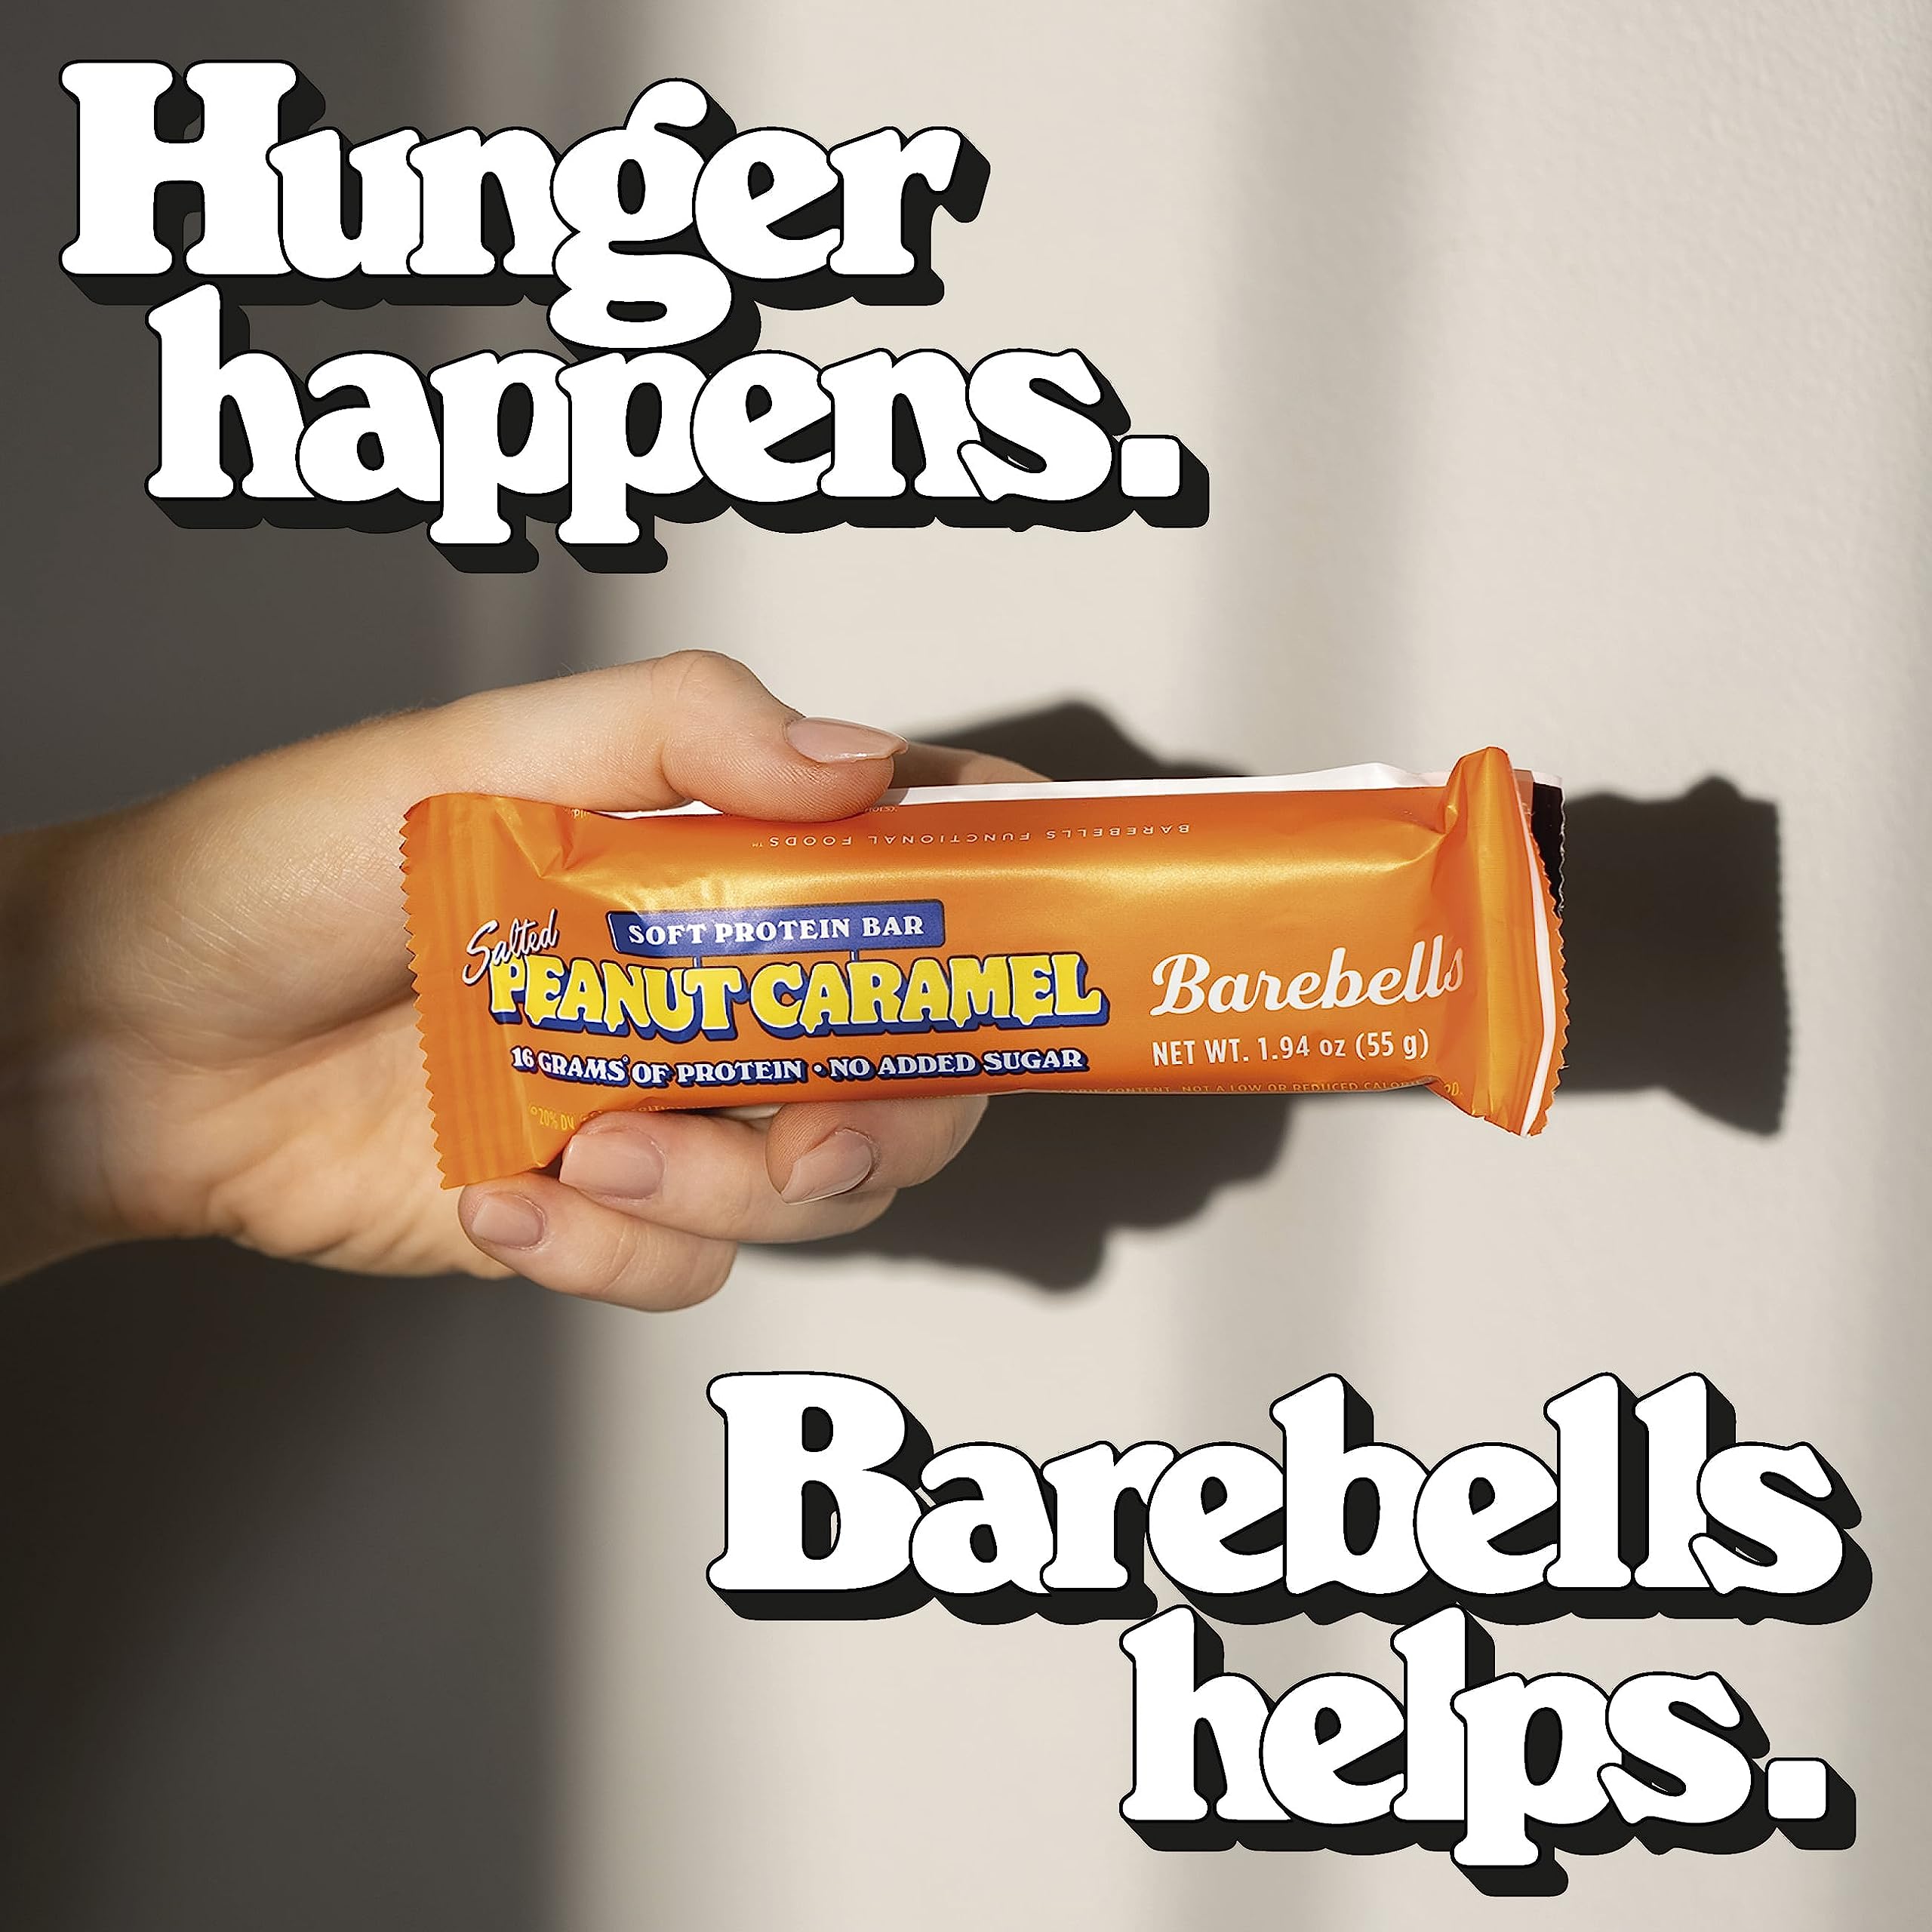 Barebells Soft Protein Bars Salted Peanut Caramel - 12 Count, 1.9oz Bars - Protein Snacks with 16g of High Protein - Chocolate Protein Bar with 2g of Total Sugars - Soft Protein Snack & Breakfast Bars